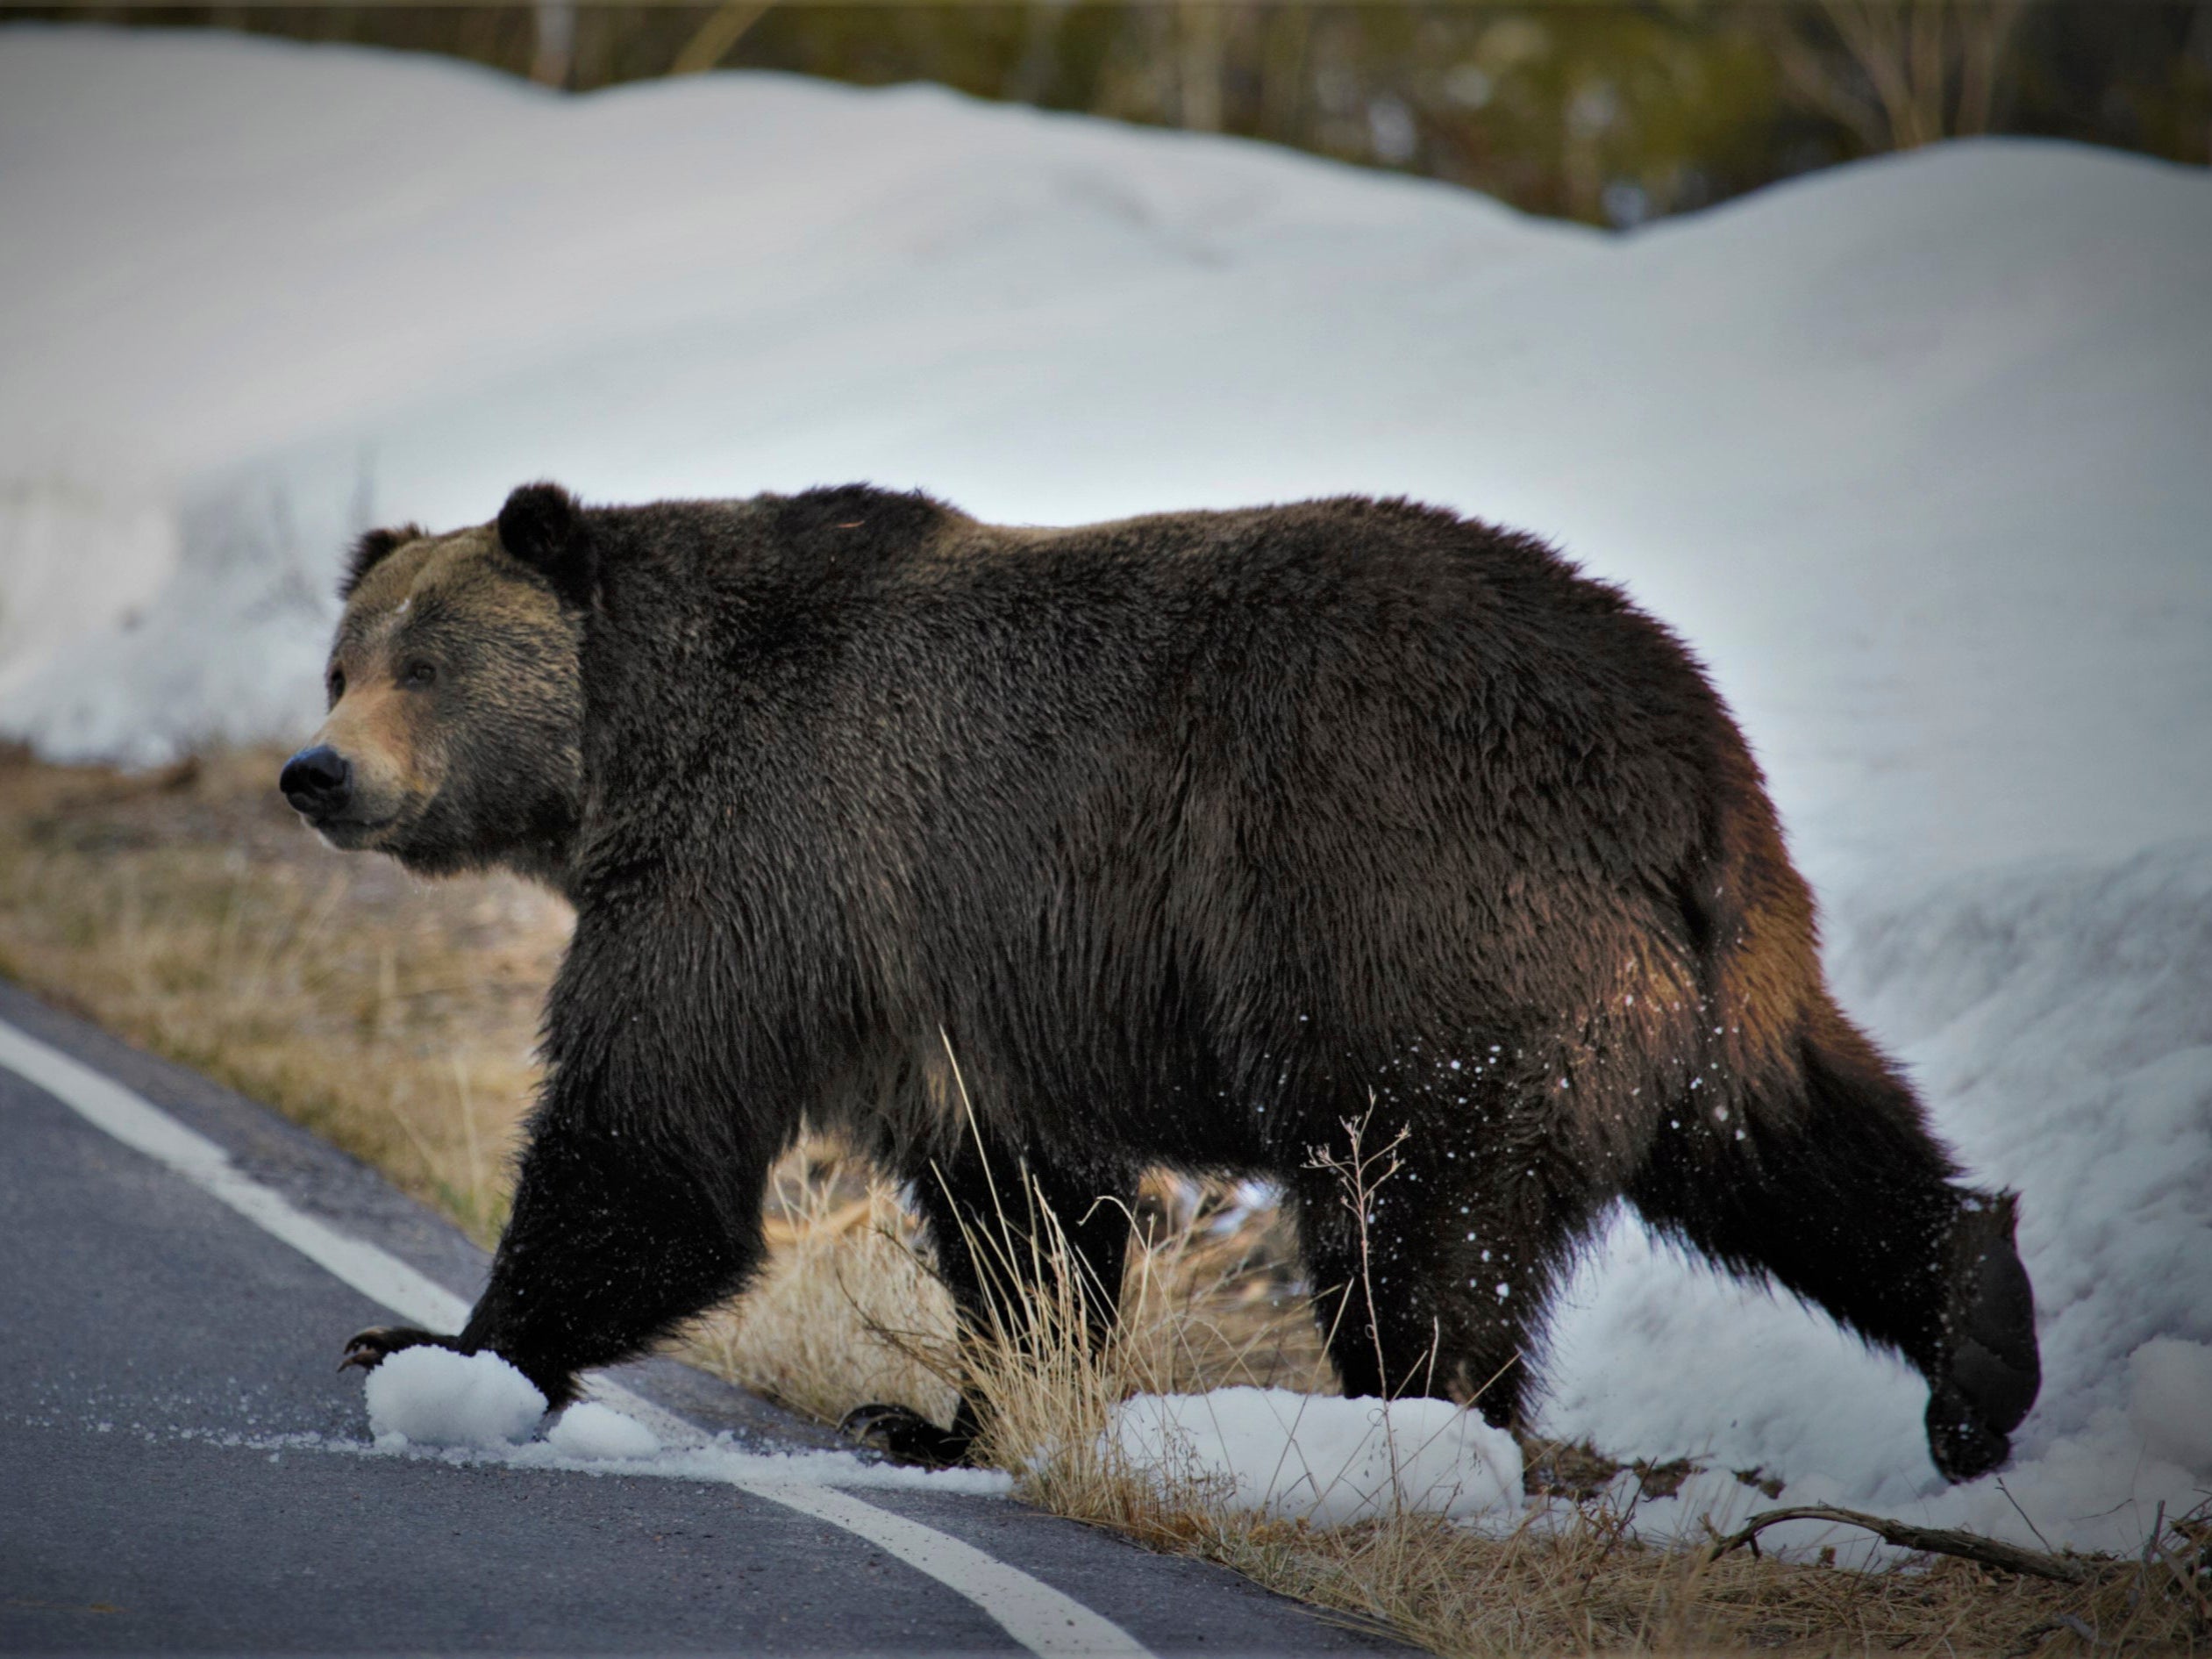 A grizzly bear just north of the National Elk Refuge in Grand Teton National Park, Wy